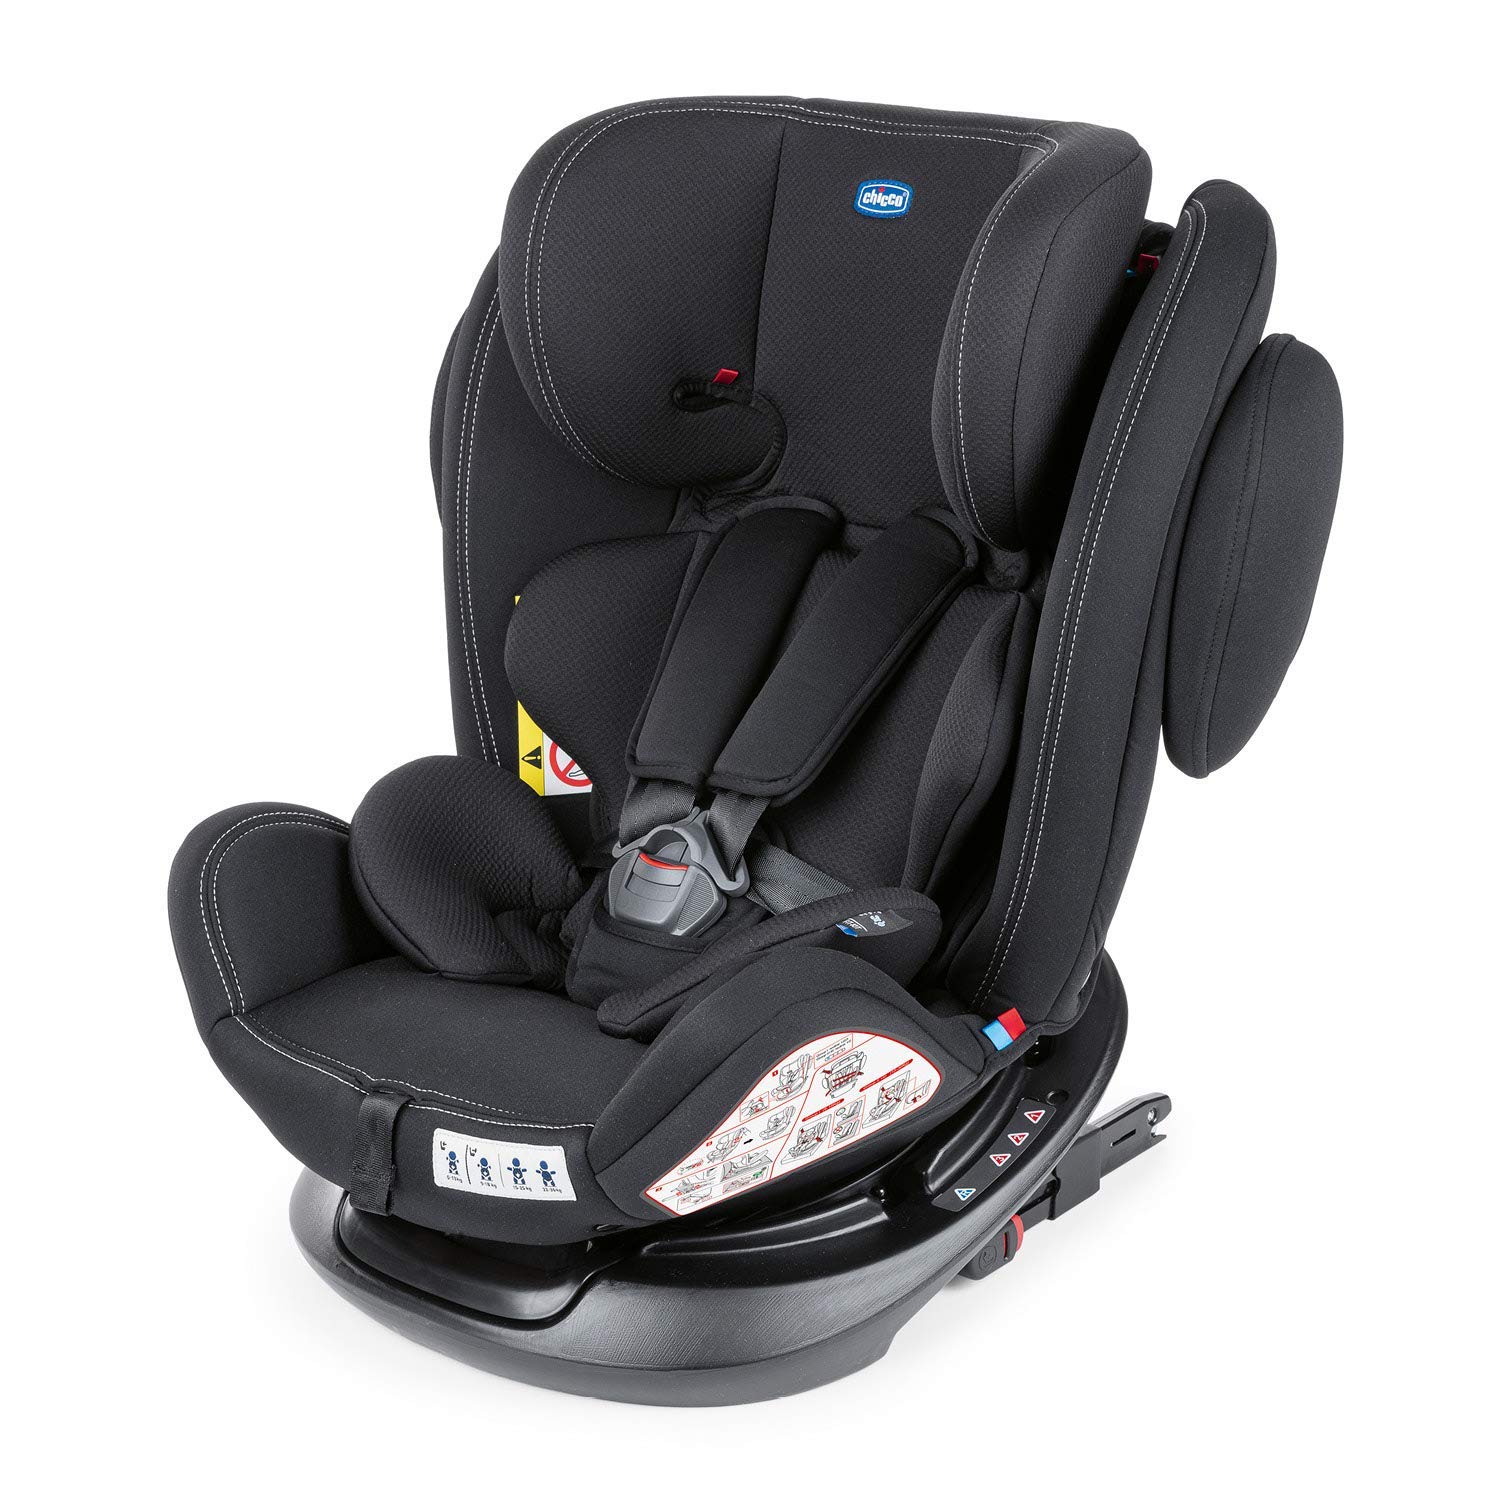 Chicco Unico Plus Car Seat 360° Rotatable 0-36 kg ISOFIX, Adjustable Child Seat Group 0-3 from 0-12 Years, Adjustable Headrest, Side Protection and Infant Insert